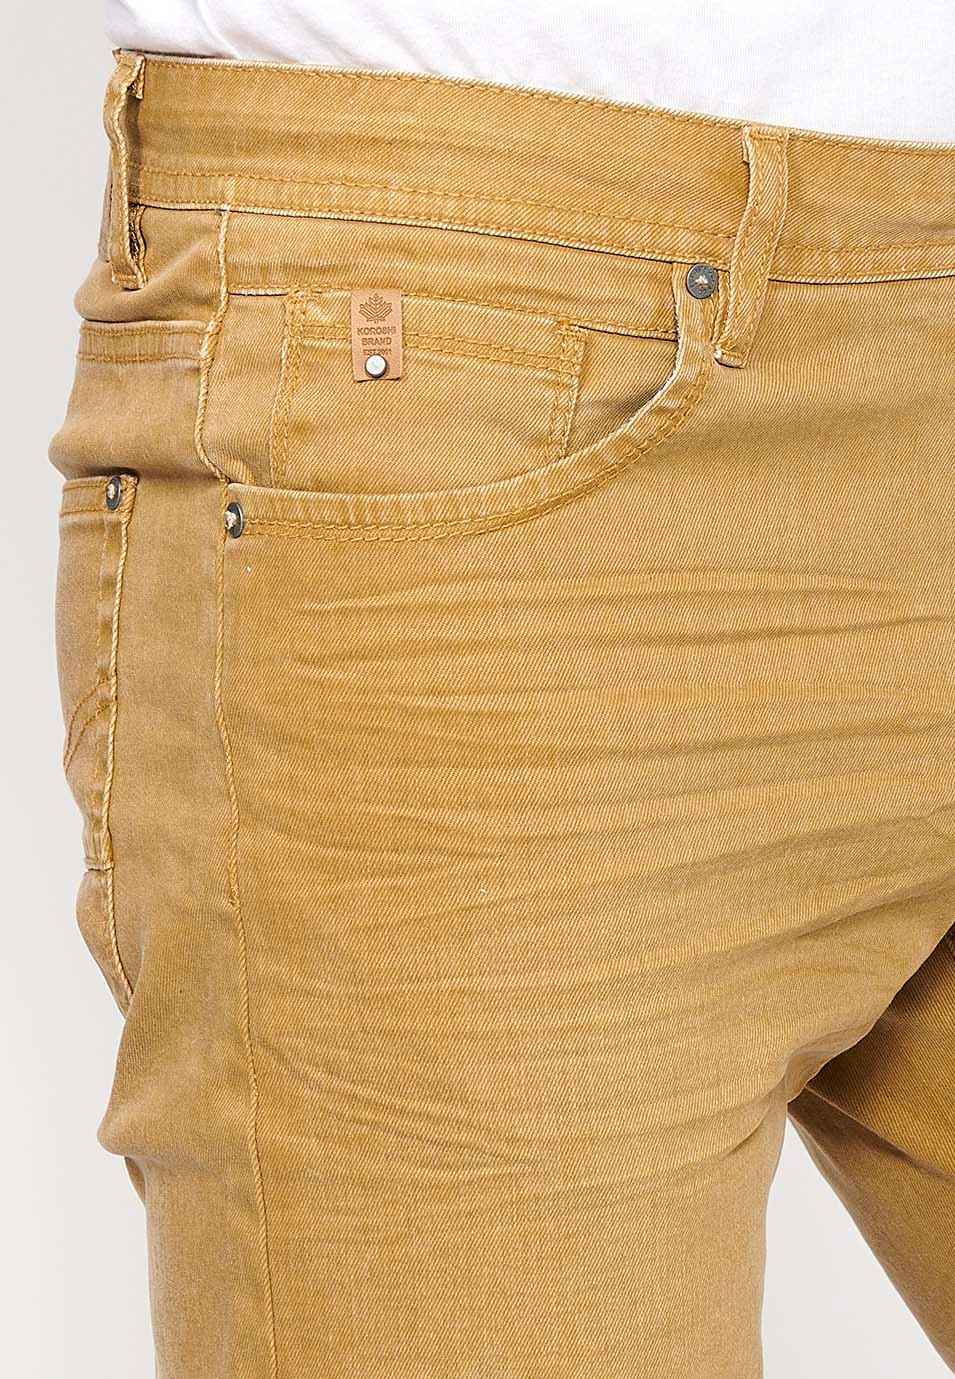 Denim Bermuda shorts with turn-up finish, front closure with zipper and button, with five pockets, one pocket pocket, Ocher Color for Men 8